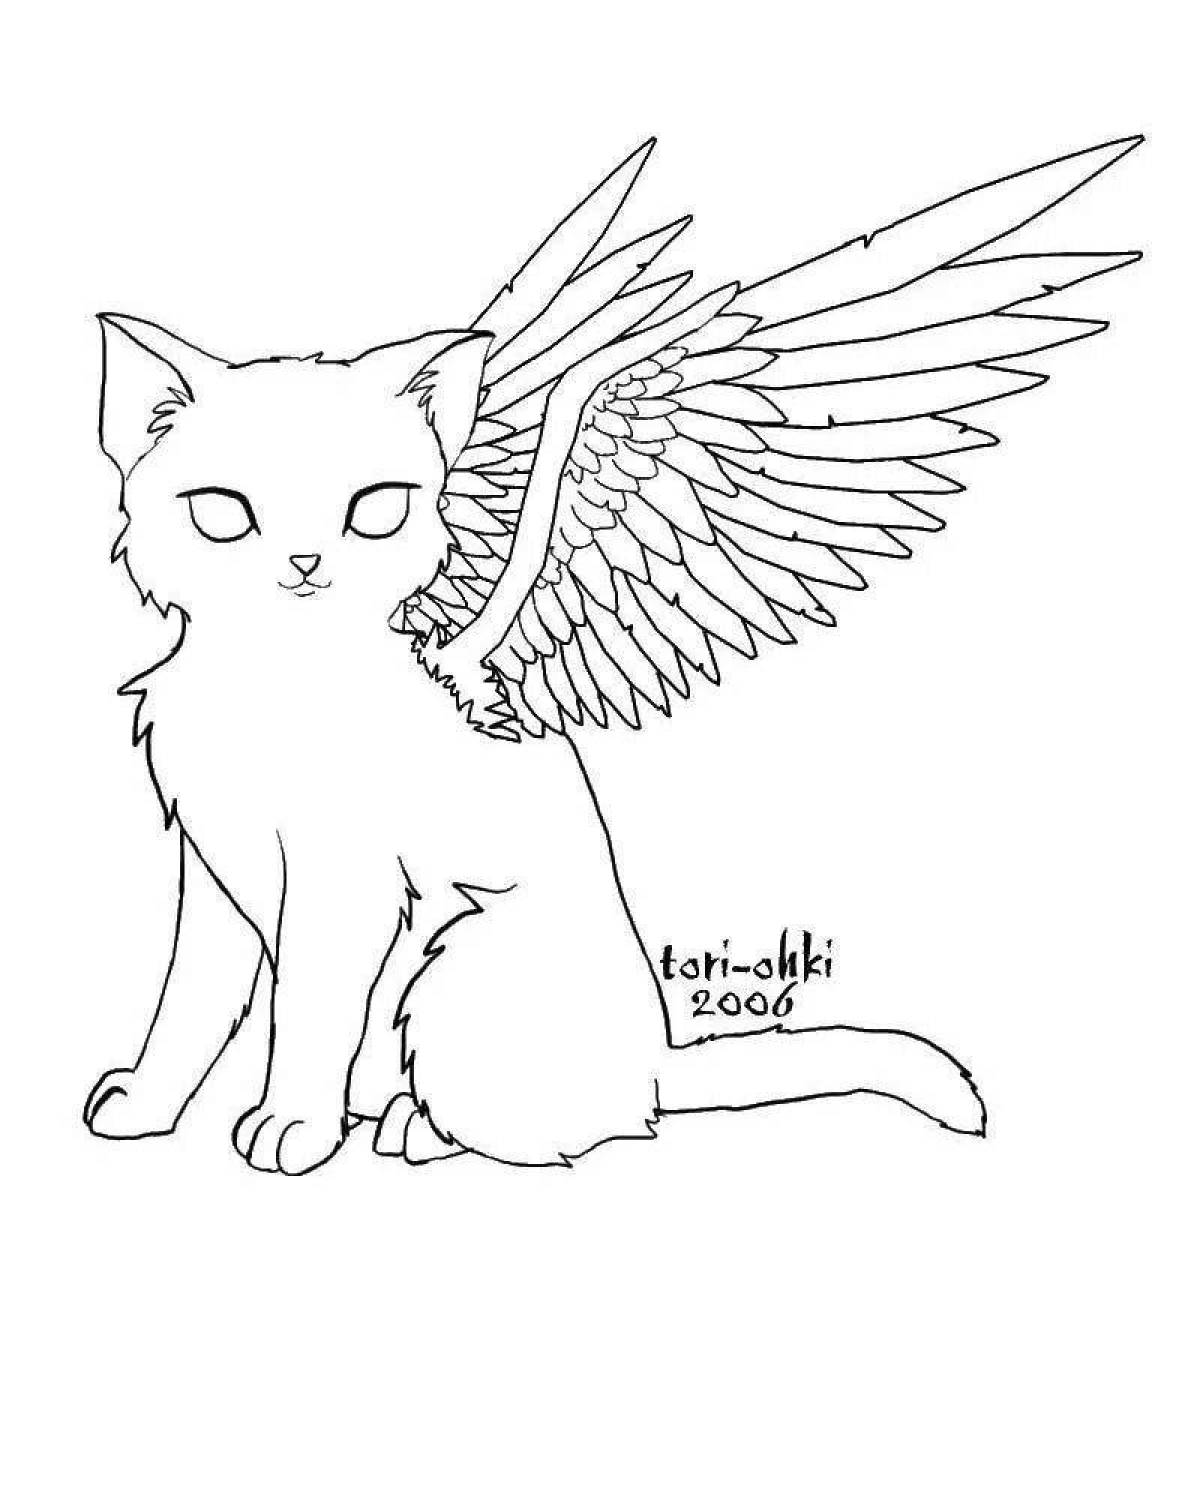 Coloring page fascinating flying cat